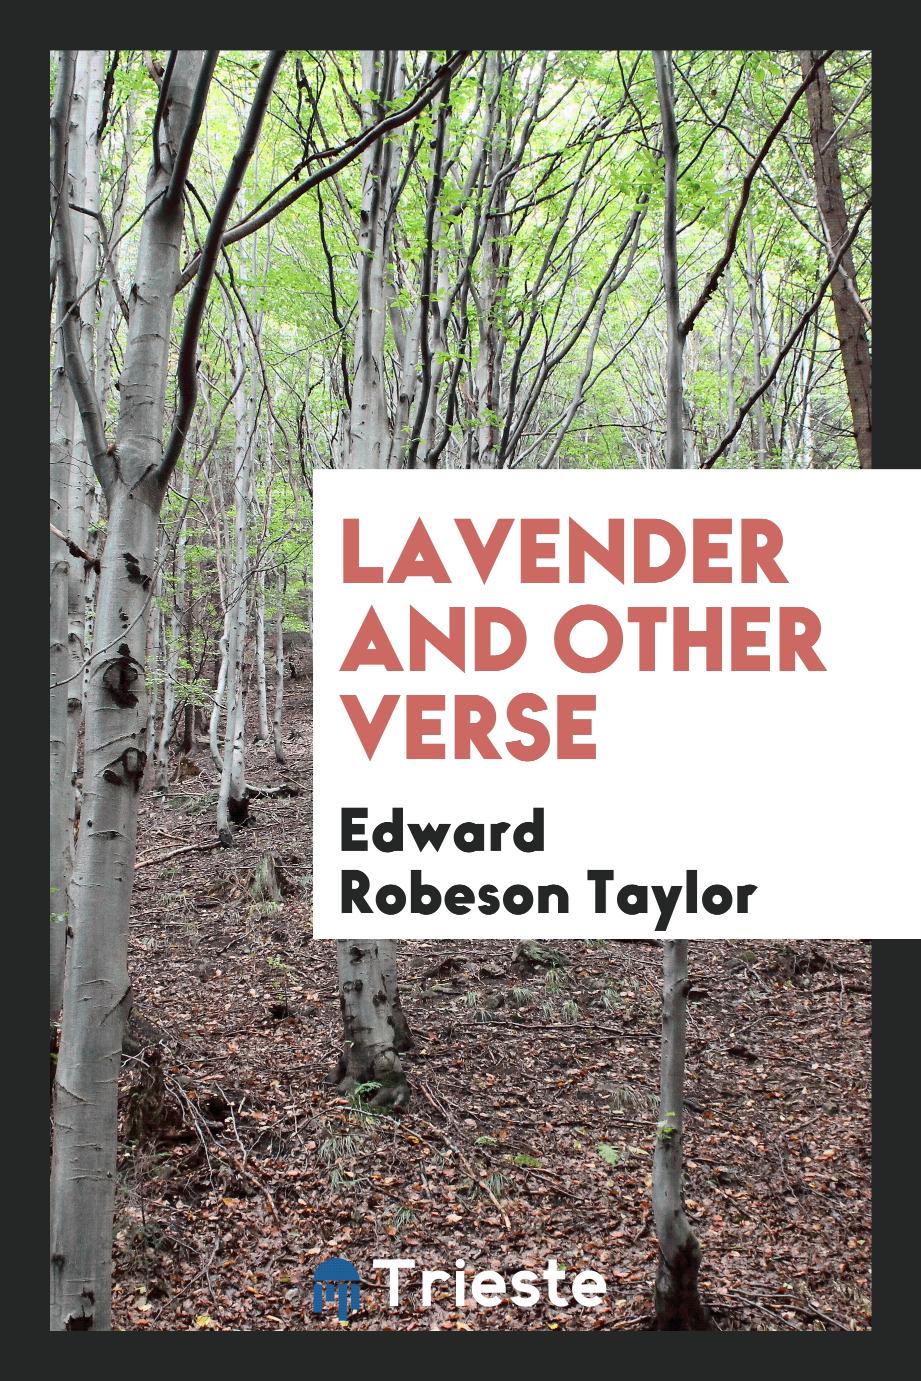 Lavender and Other Verse